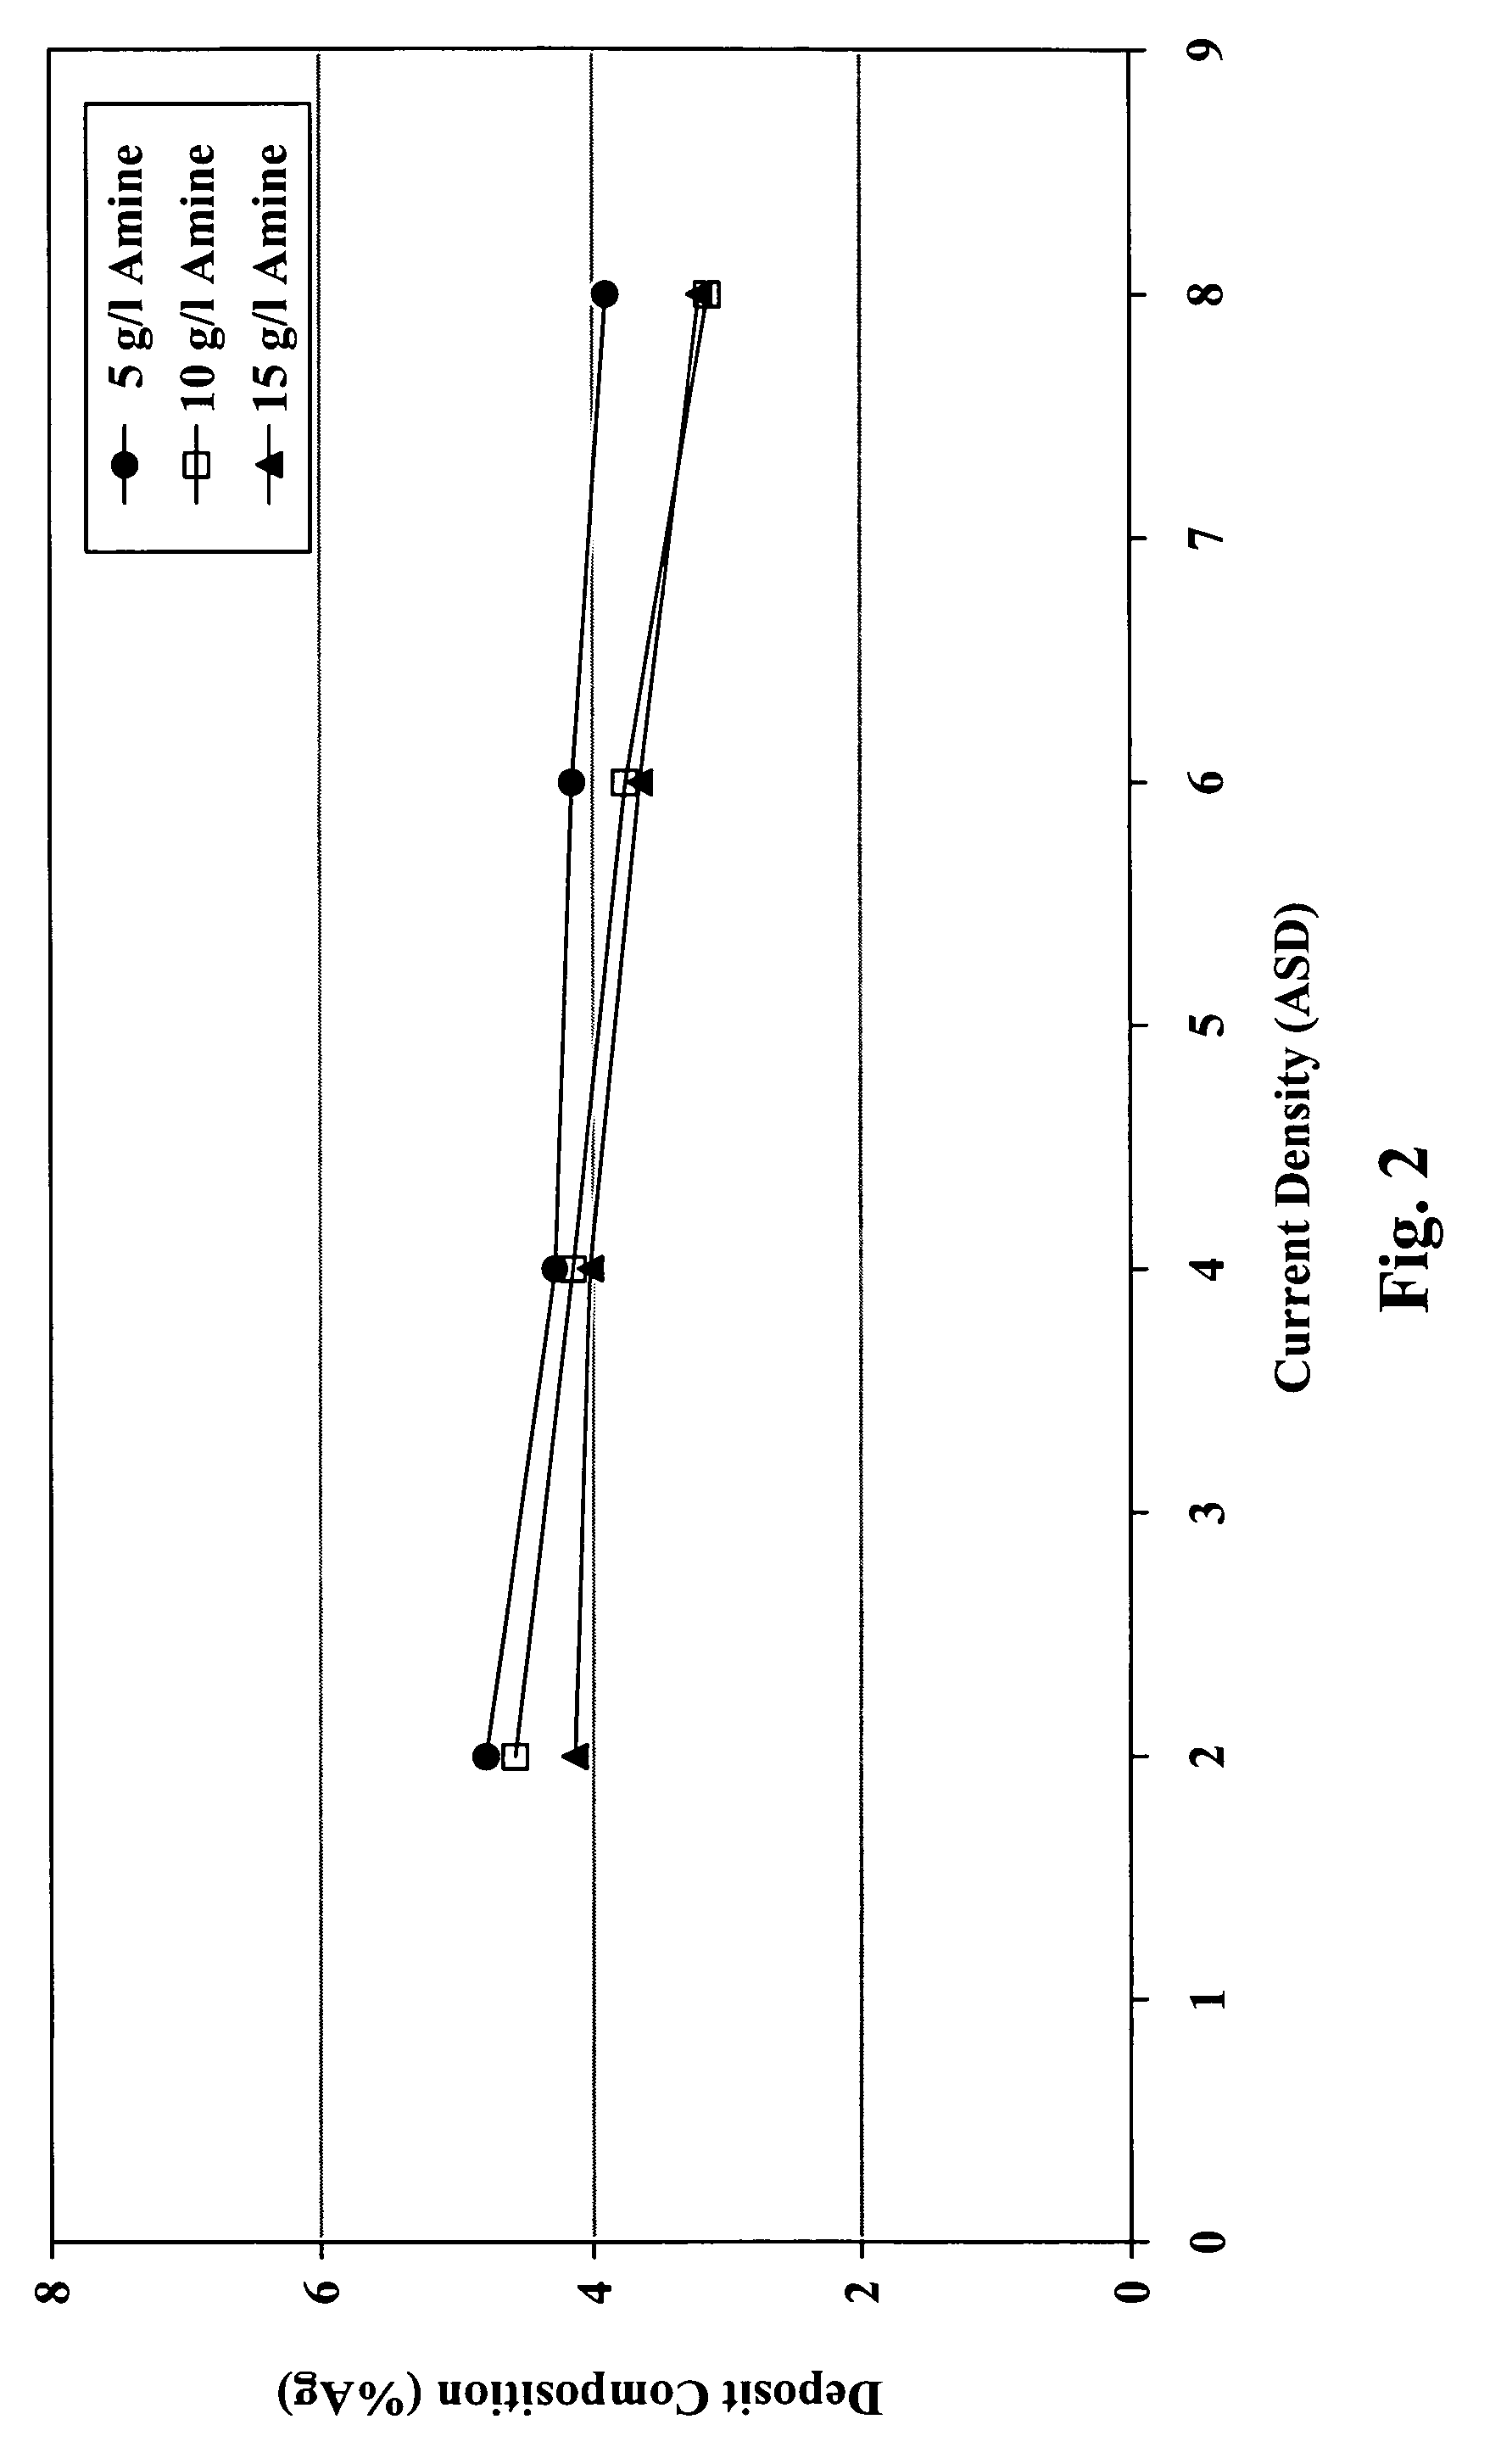 Electroplating compositions and methods